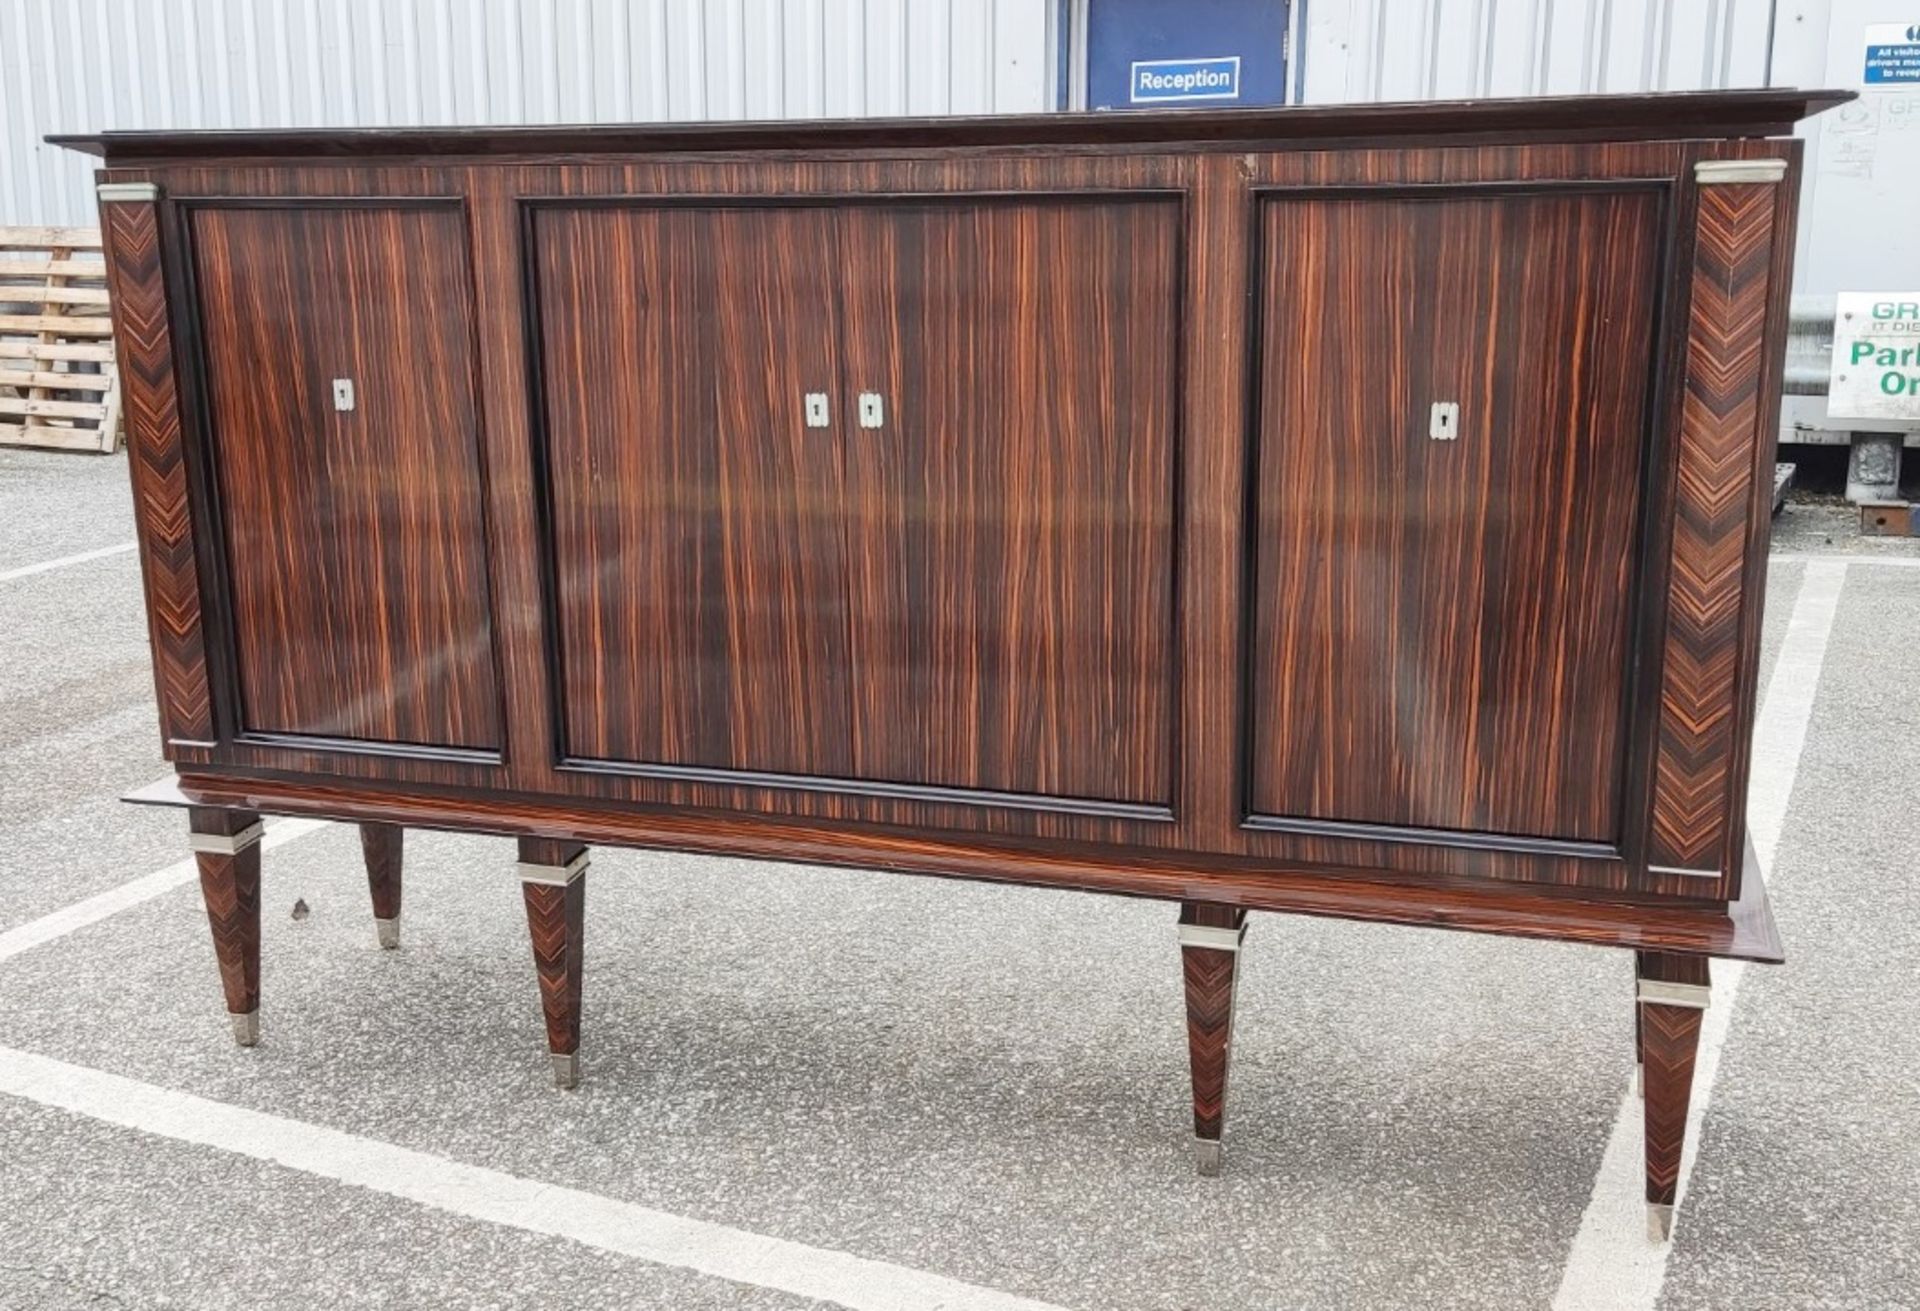 1 x MAURICE RINCK-Inspired Art Deco Four Door Sideboard With 6 Silver Embellished Feet